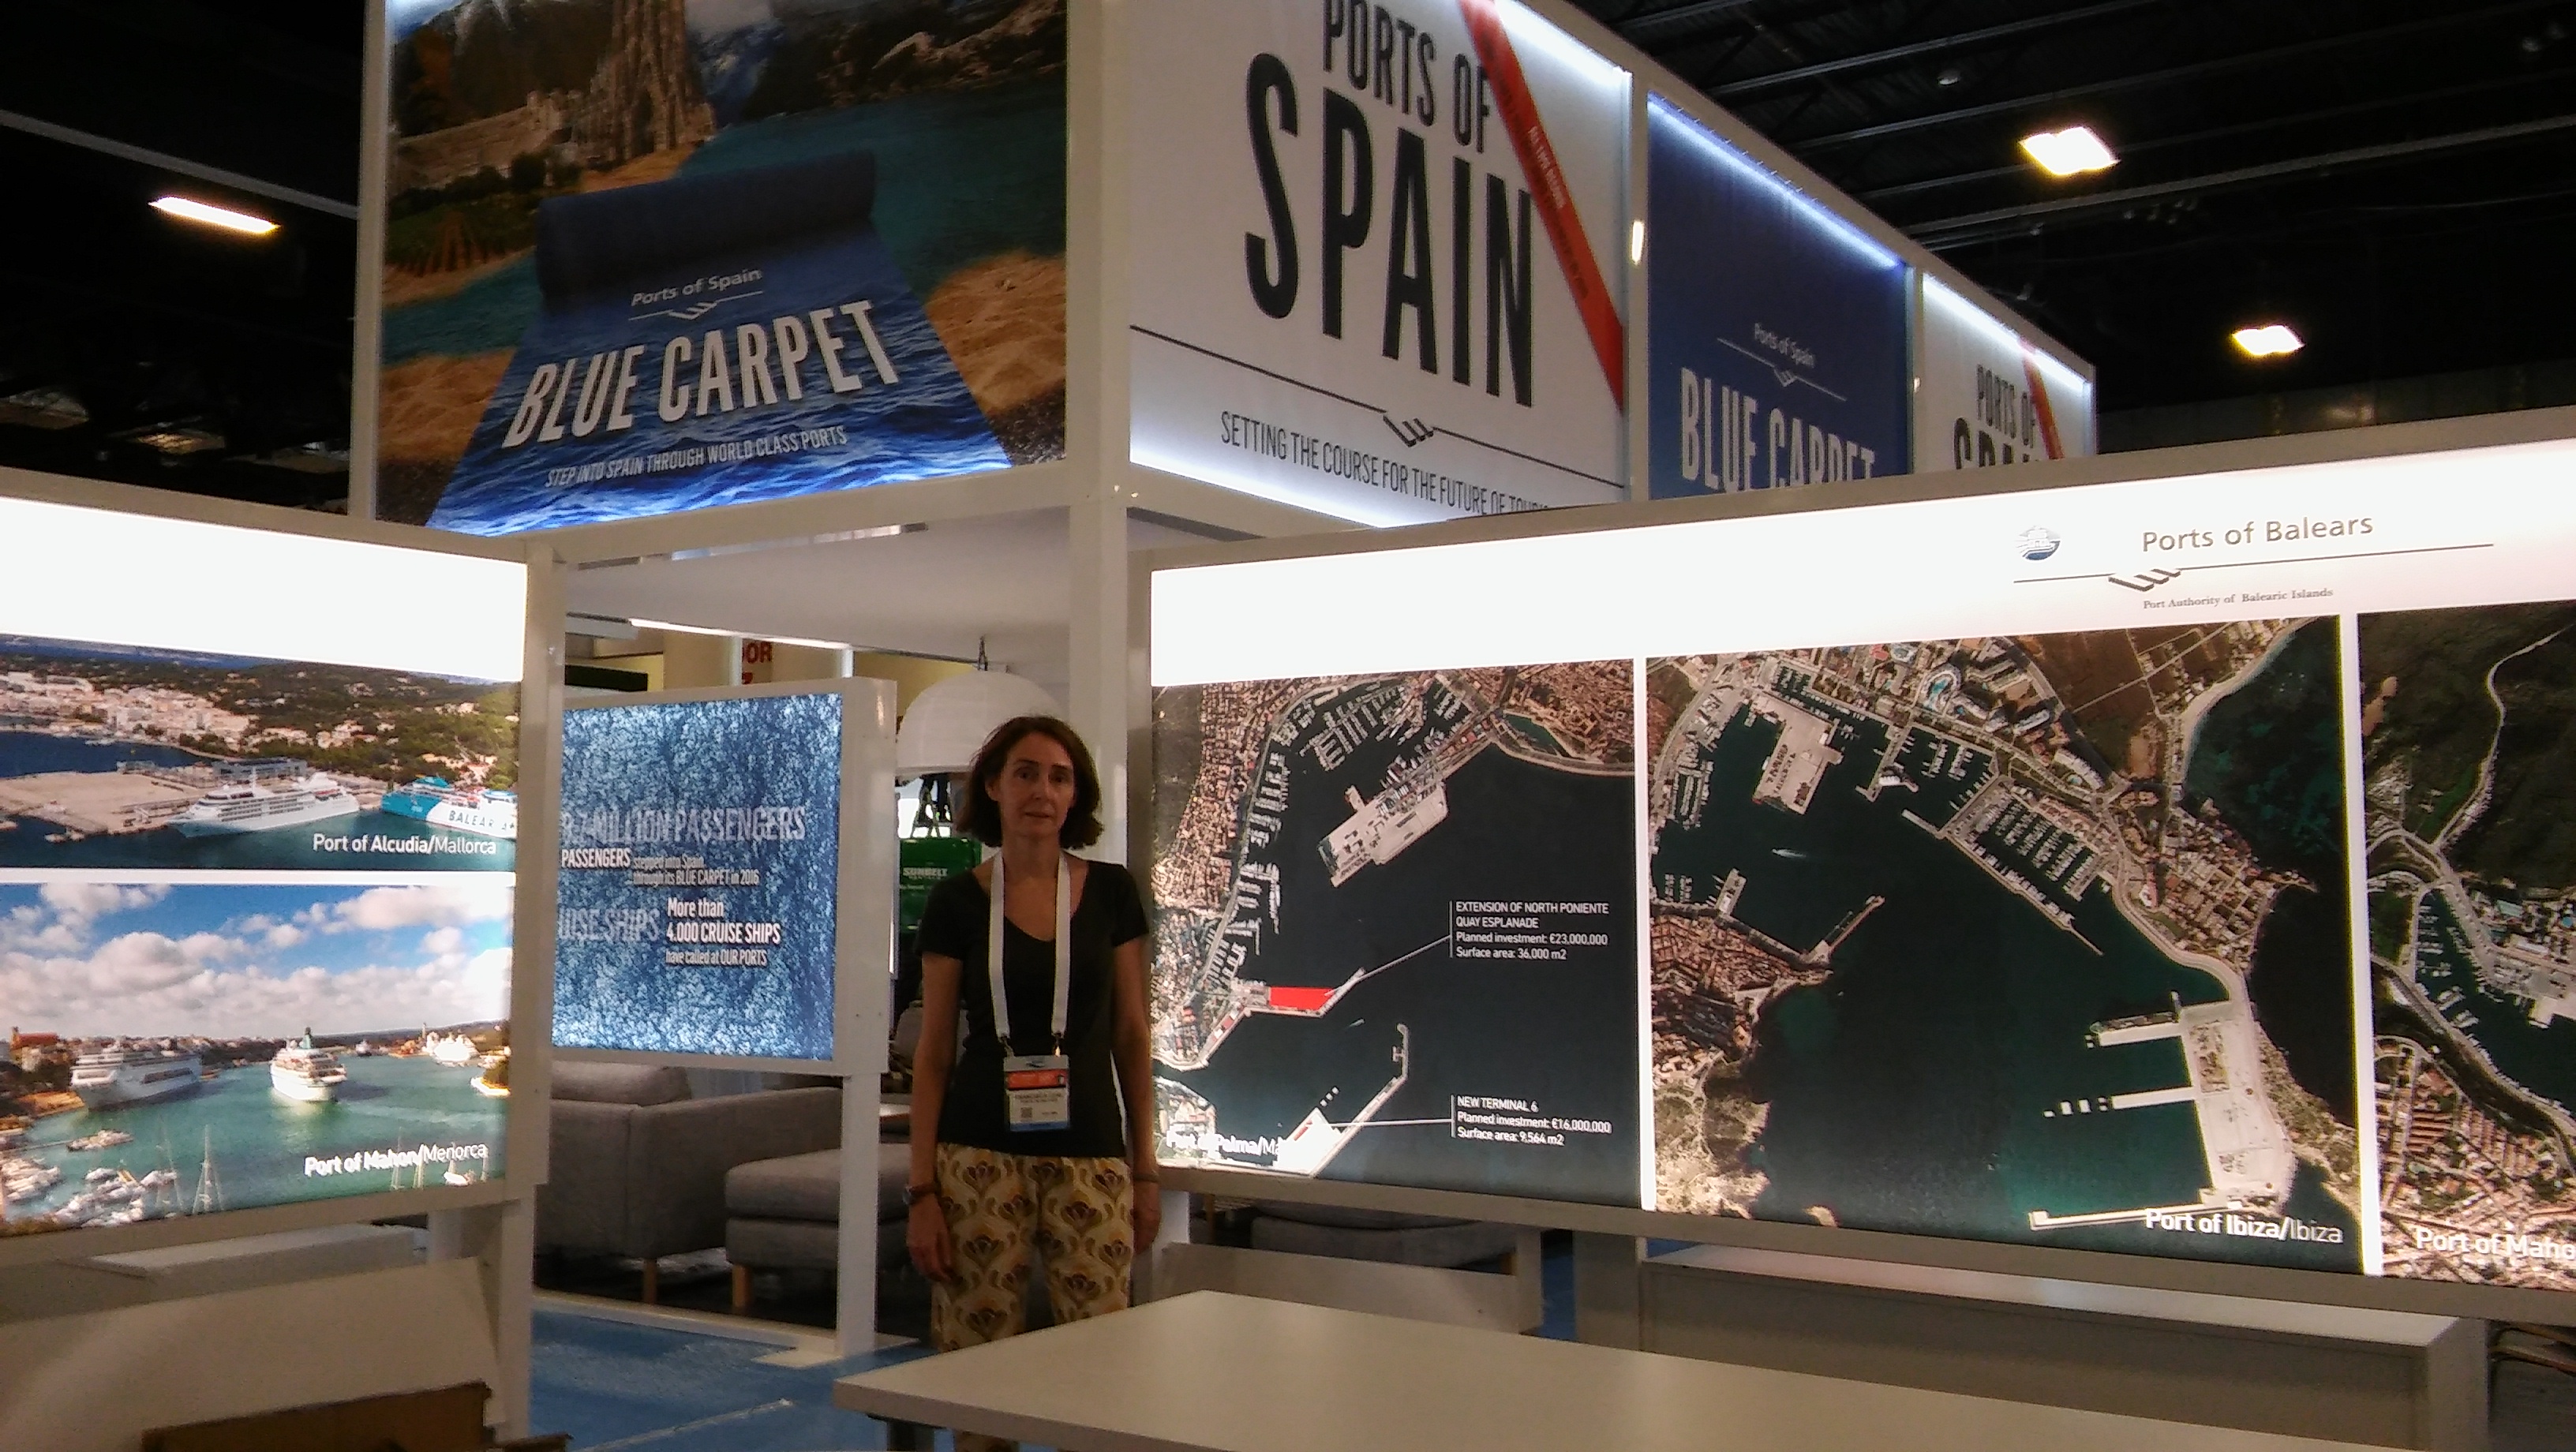 The APB heads the Balearic delegation at the Seatrade Cruise Global in Florida, the cruise industry's premier global event